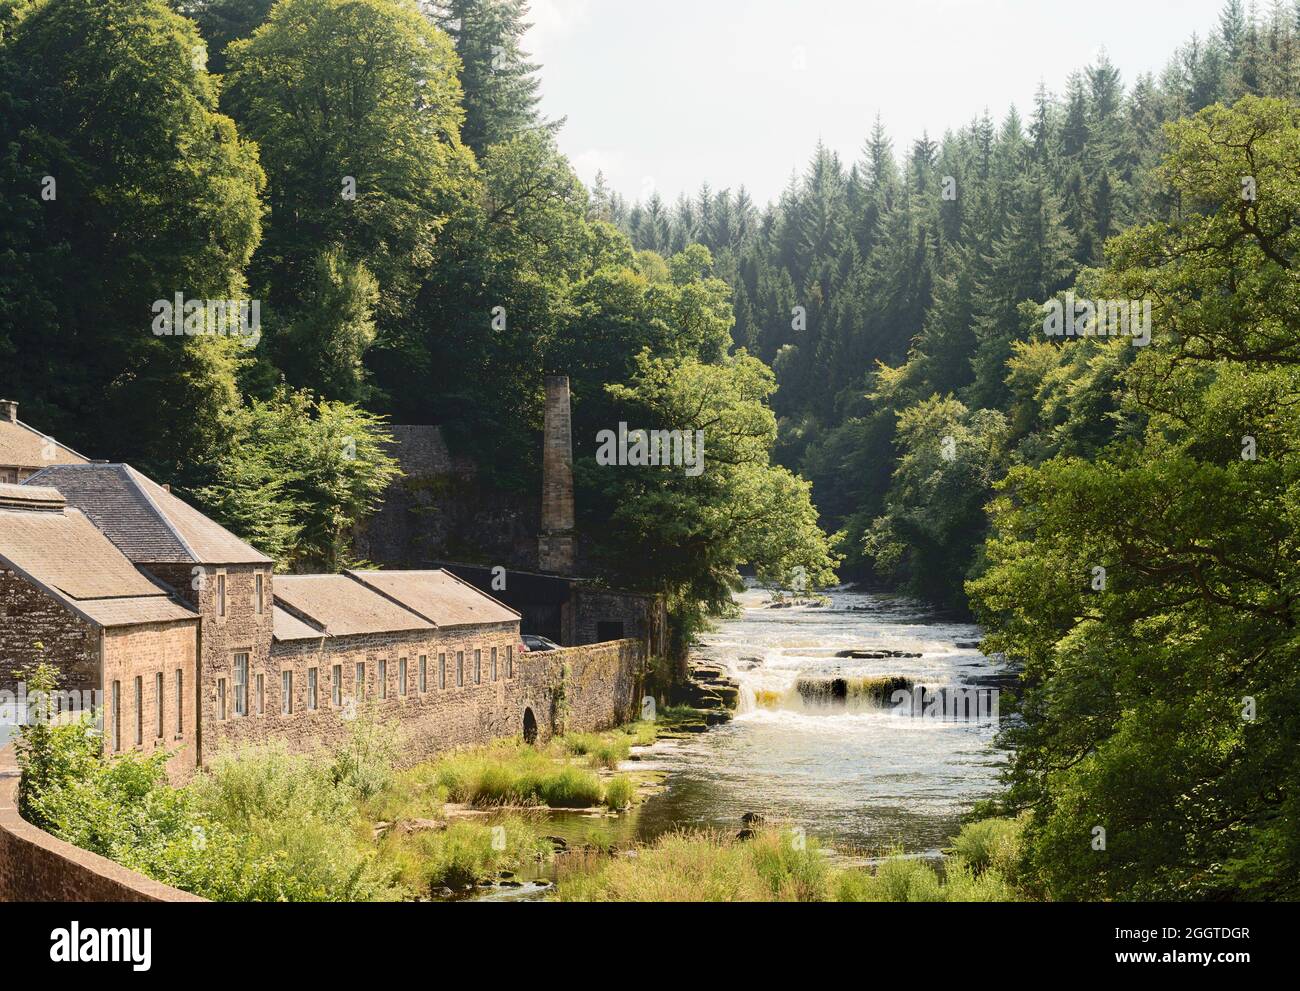 The river Clyde passes over a waterfall in New Lanark, Scotland, UK Stock Photo